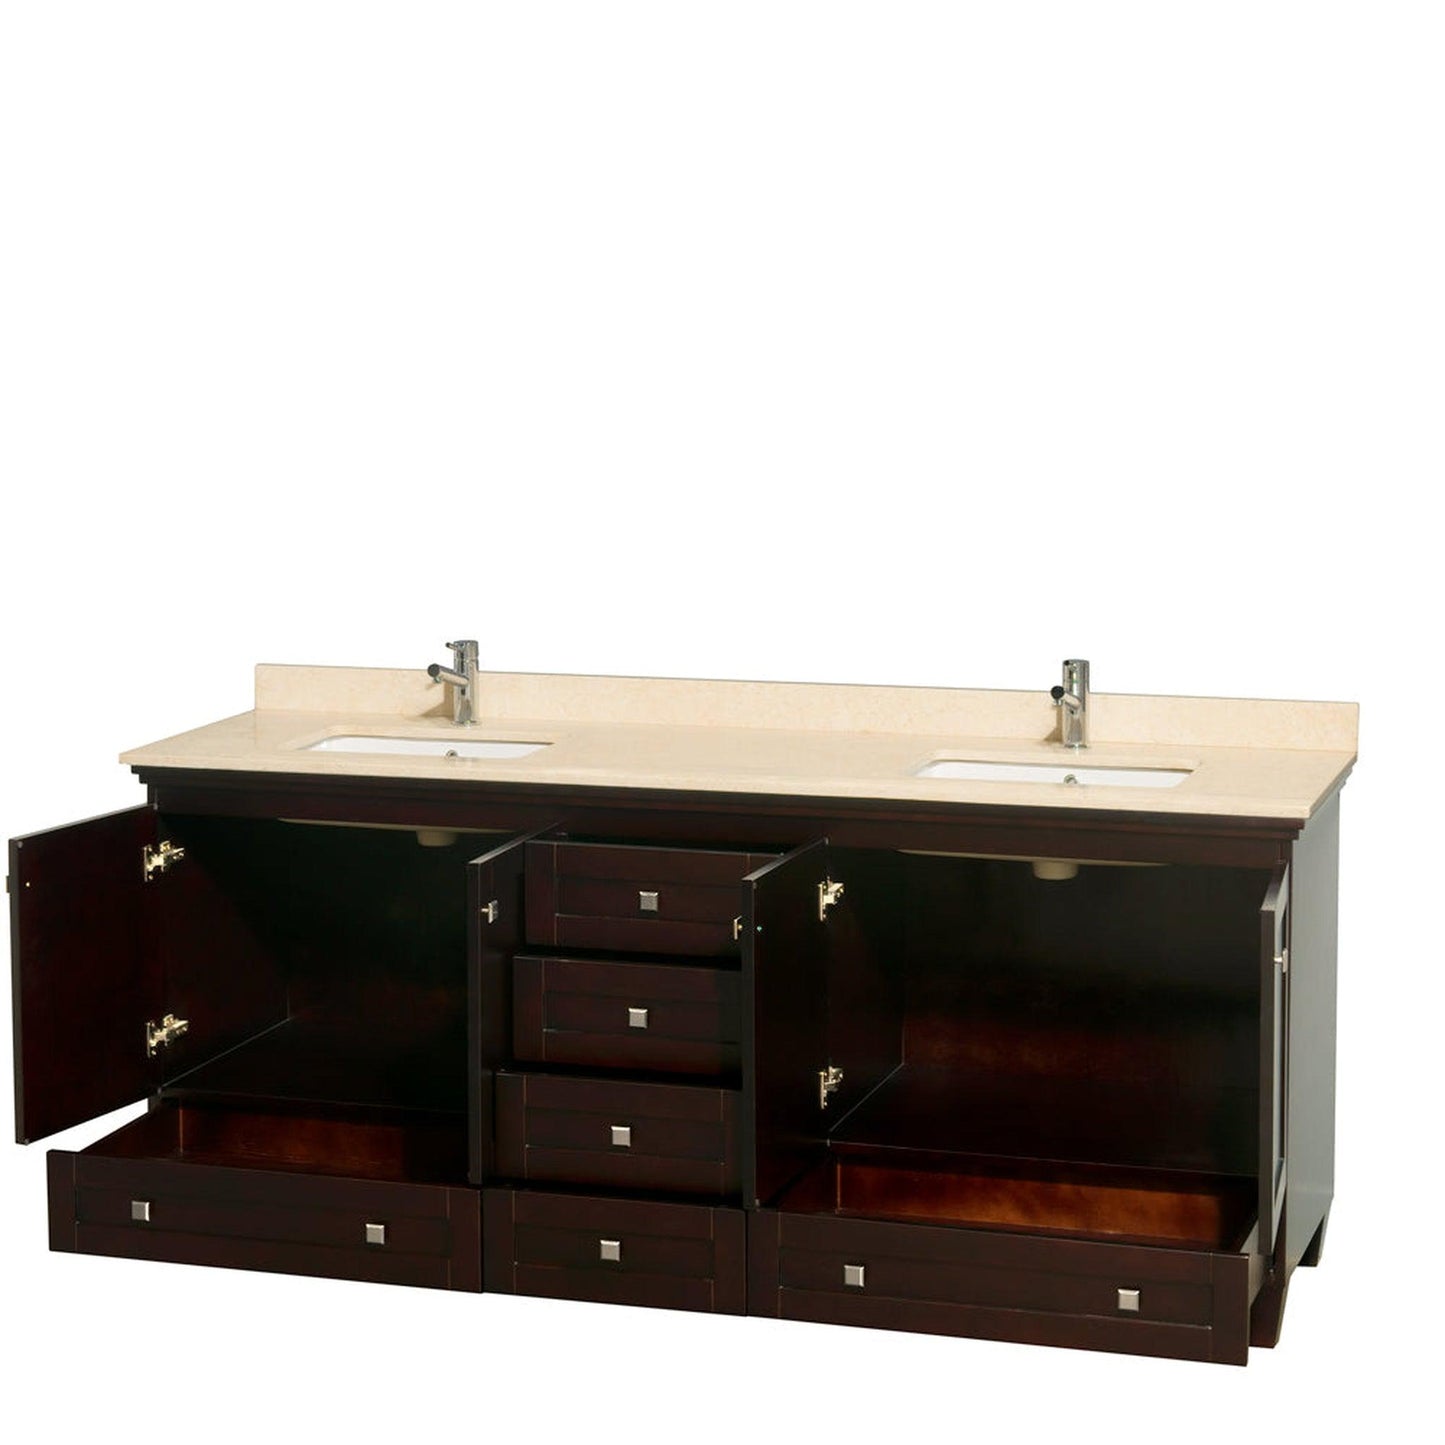 Wyndham Collection Acclaim 80" Double Bathroom Vanity in Espresso With Ivory Marble Countertop & Undermount Square Sink